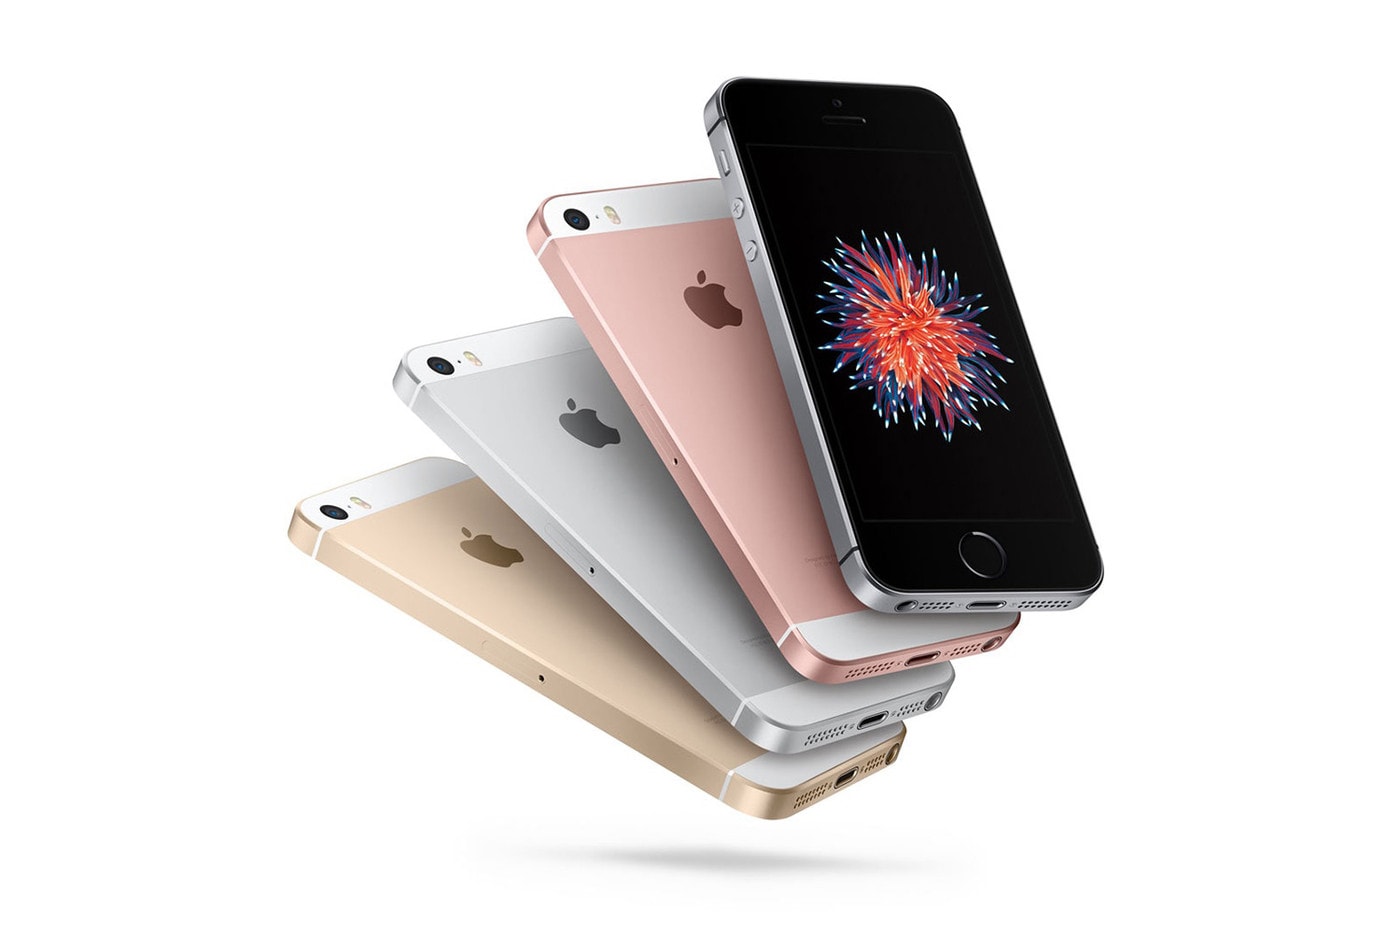 Apple iPhone SE (2020) - Full phone specifications